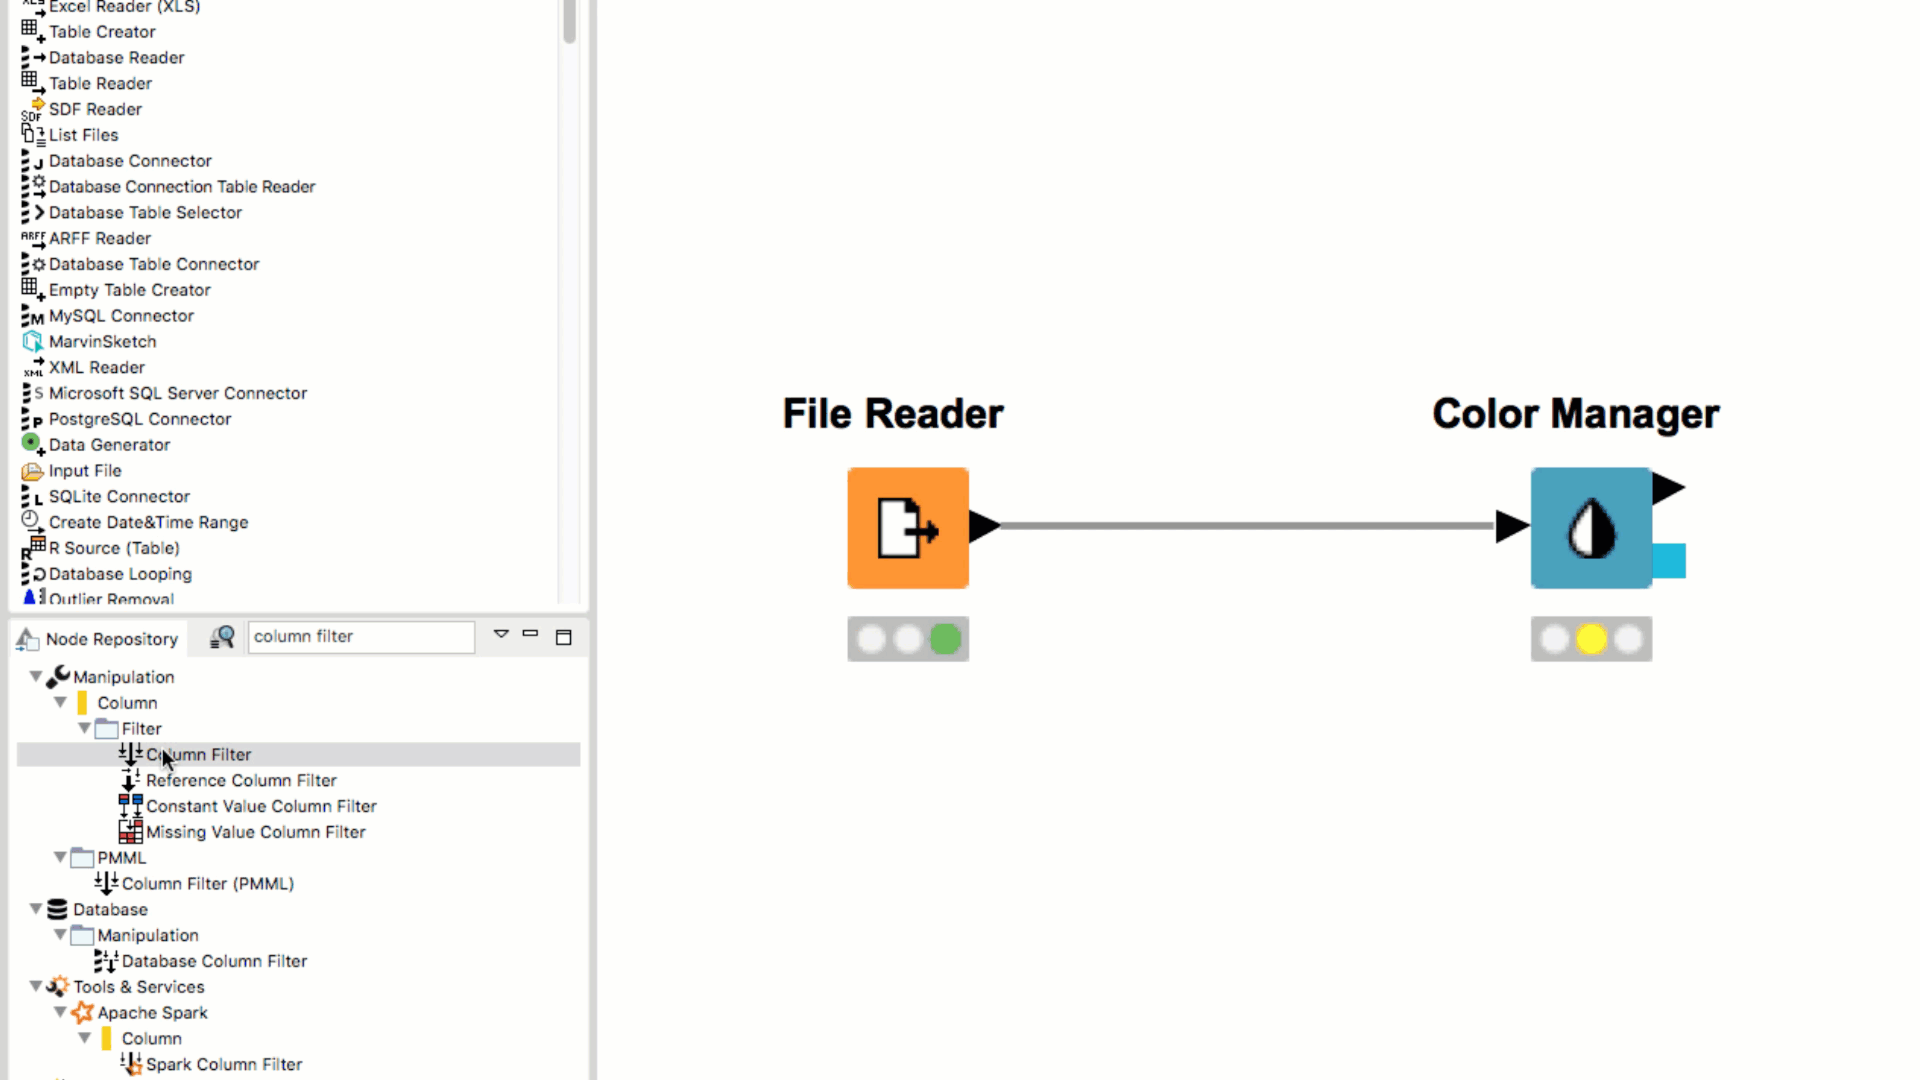 How to have a node automatically inserted between two nodes in KNIME.